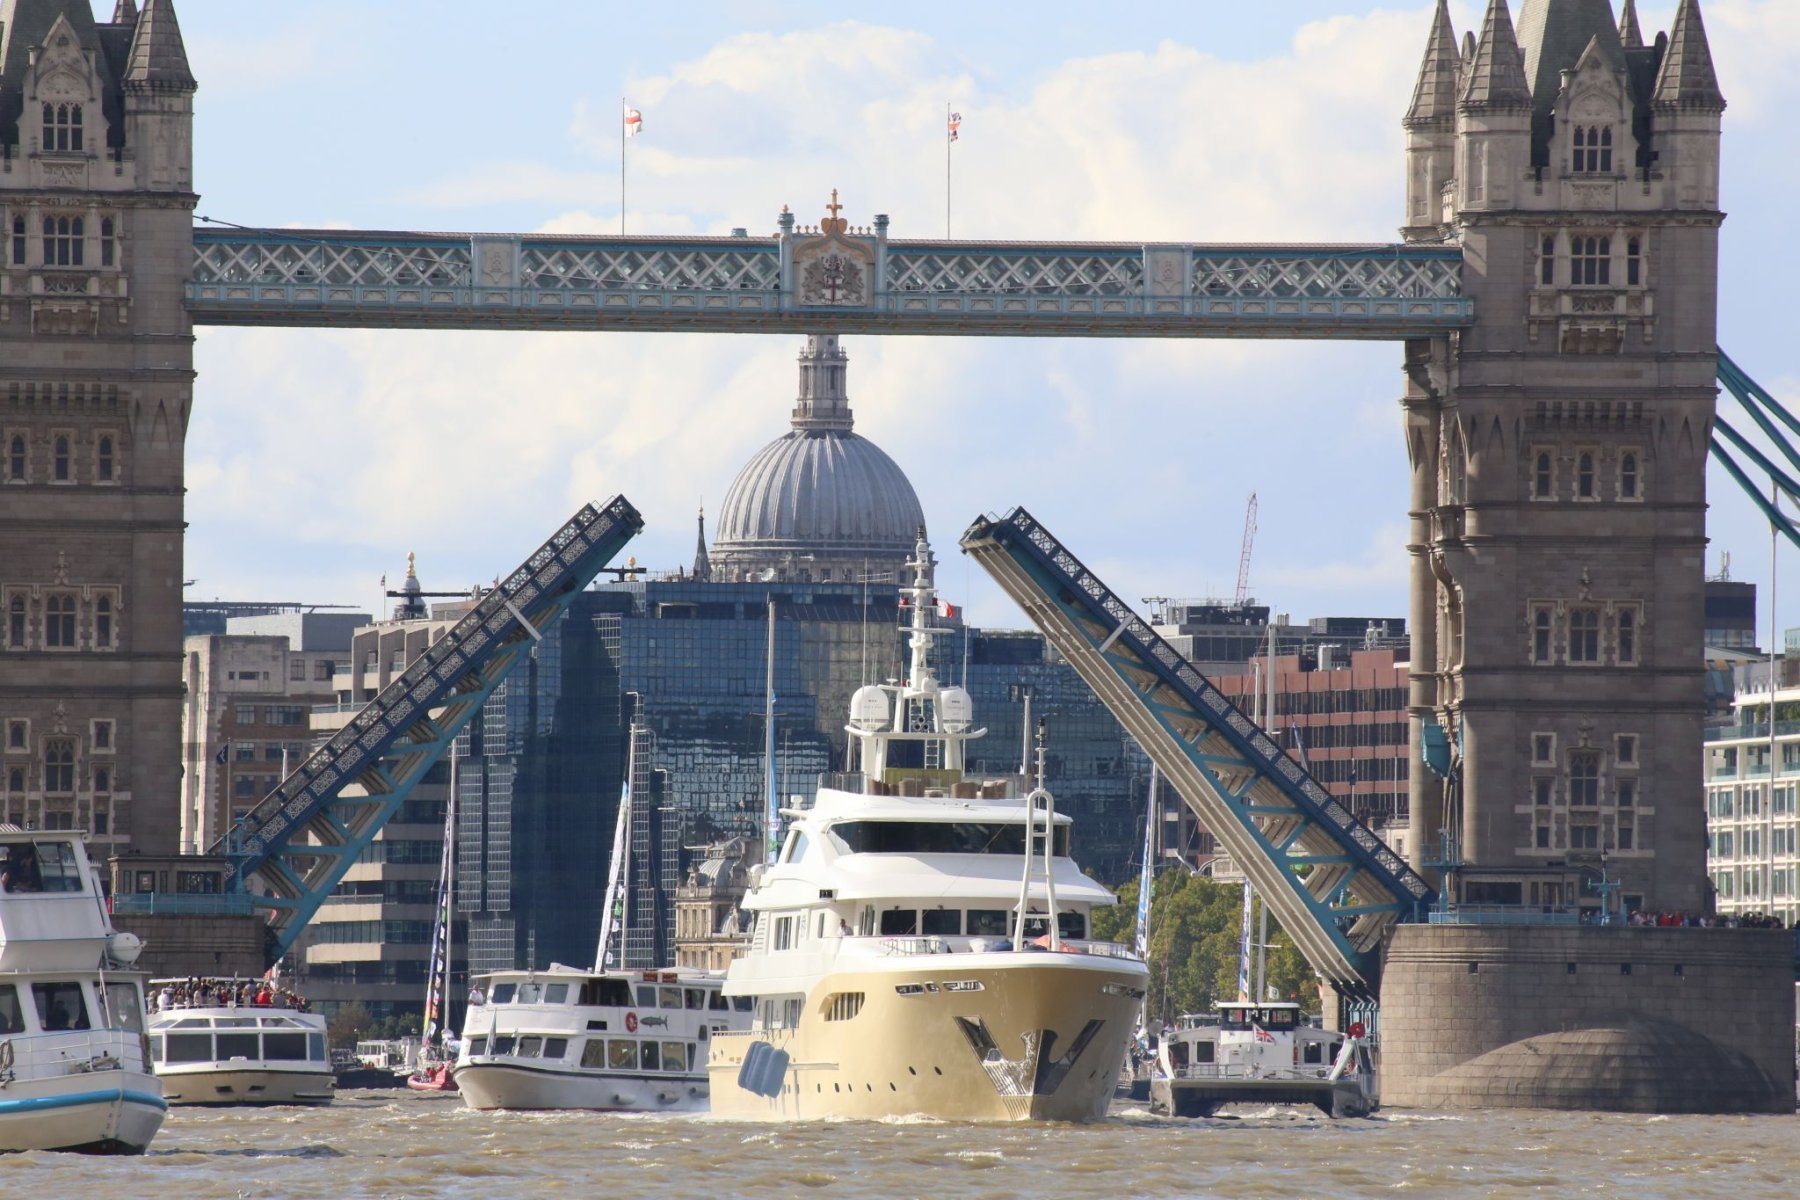 Jade 959 in London on the River Thames 01-Sep-2019 coming downstream with Tower Bridge in the background